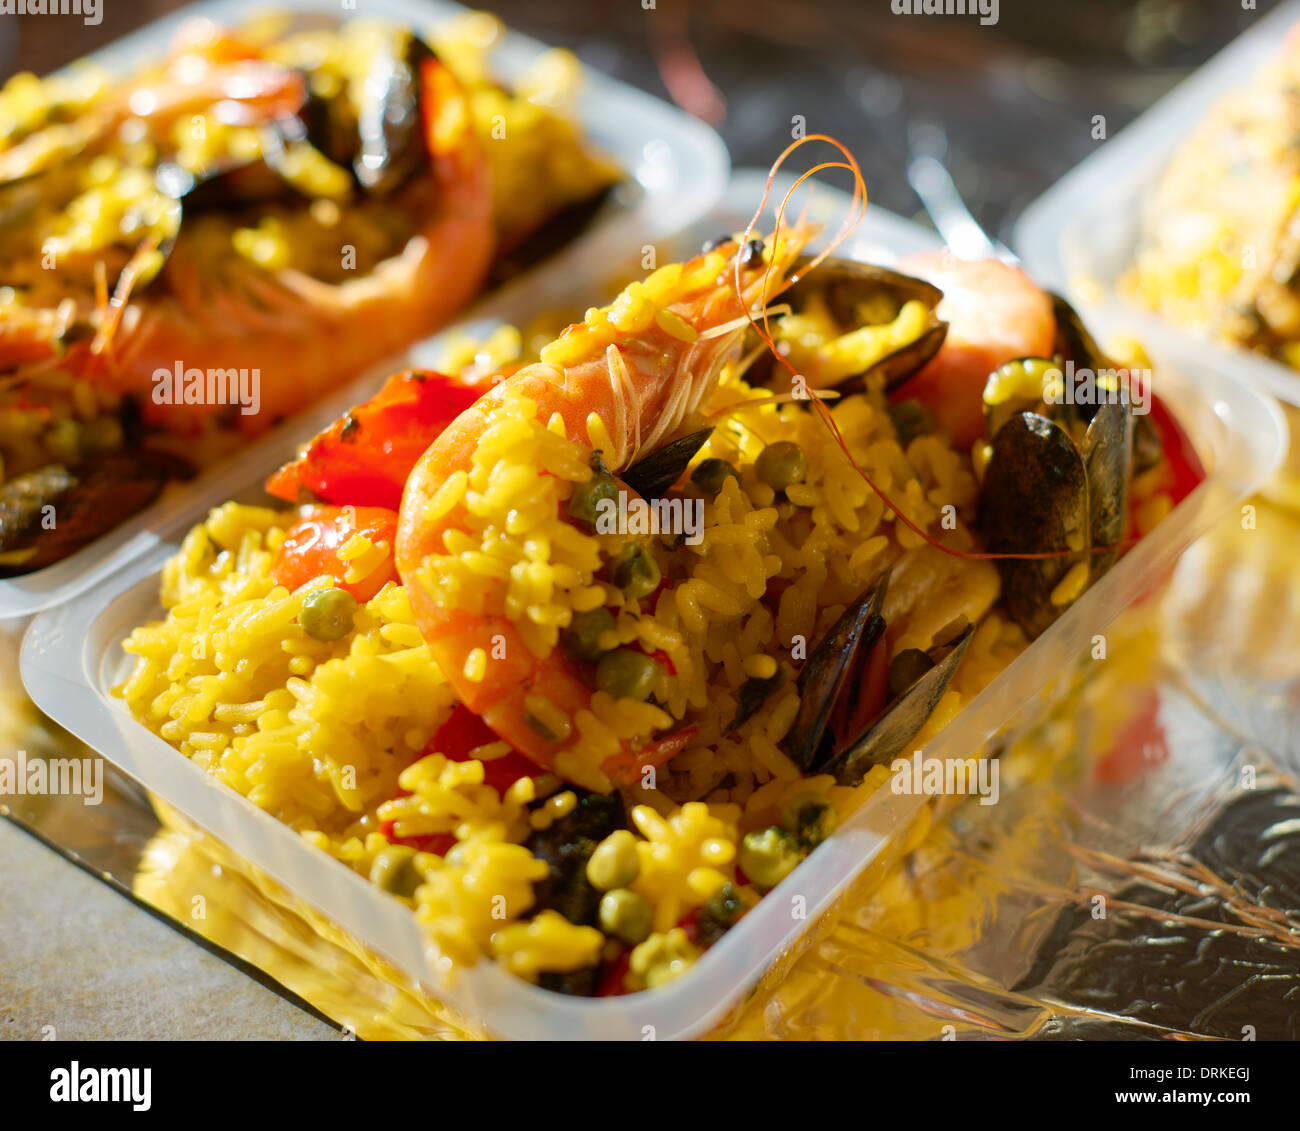 Portion of Spanish paella on market in Marselle, Provence, France Stock Photo